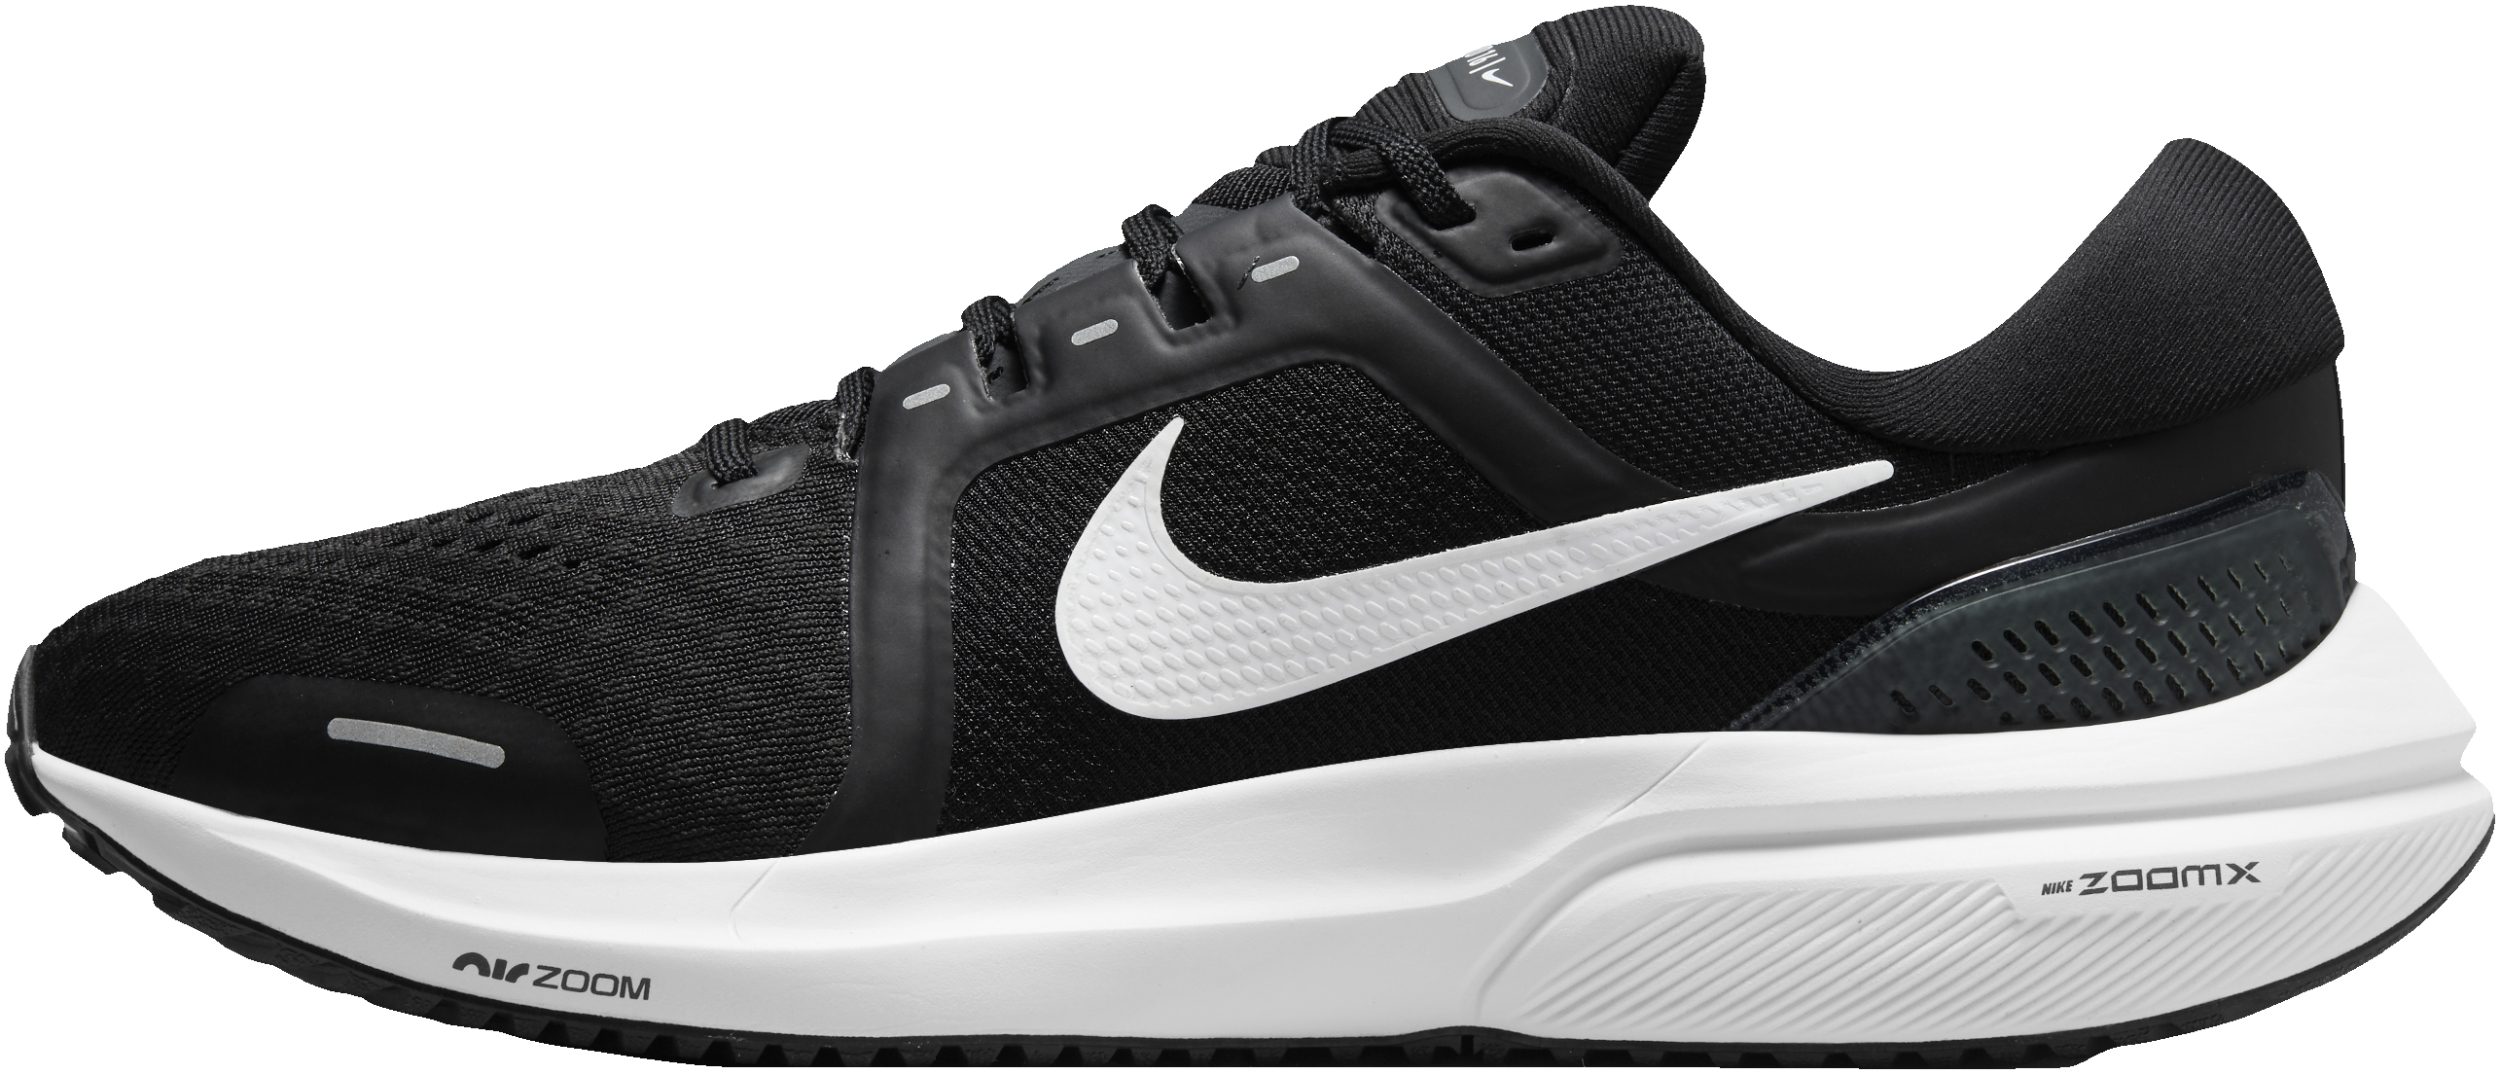 Nike Air Zoom Vomero 16 - Deals, Facts, Reviews (2021) | RunRepeat